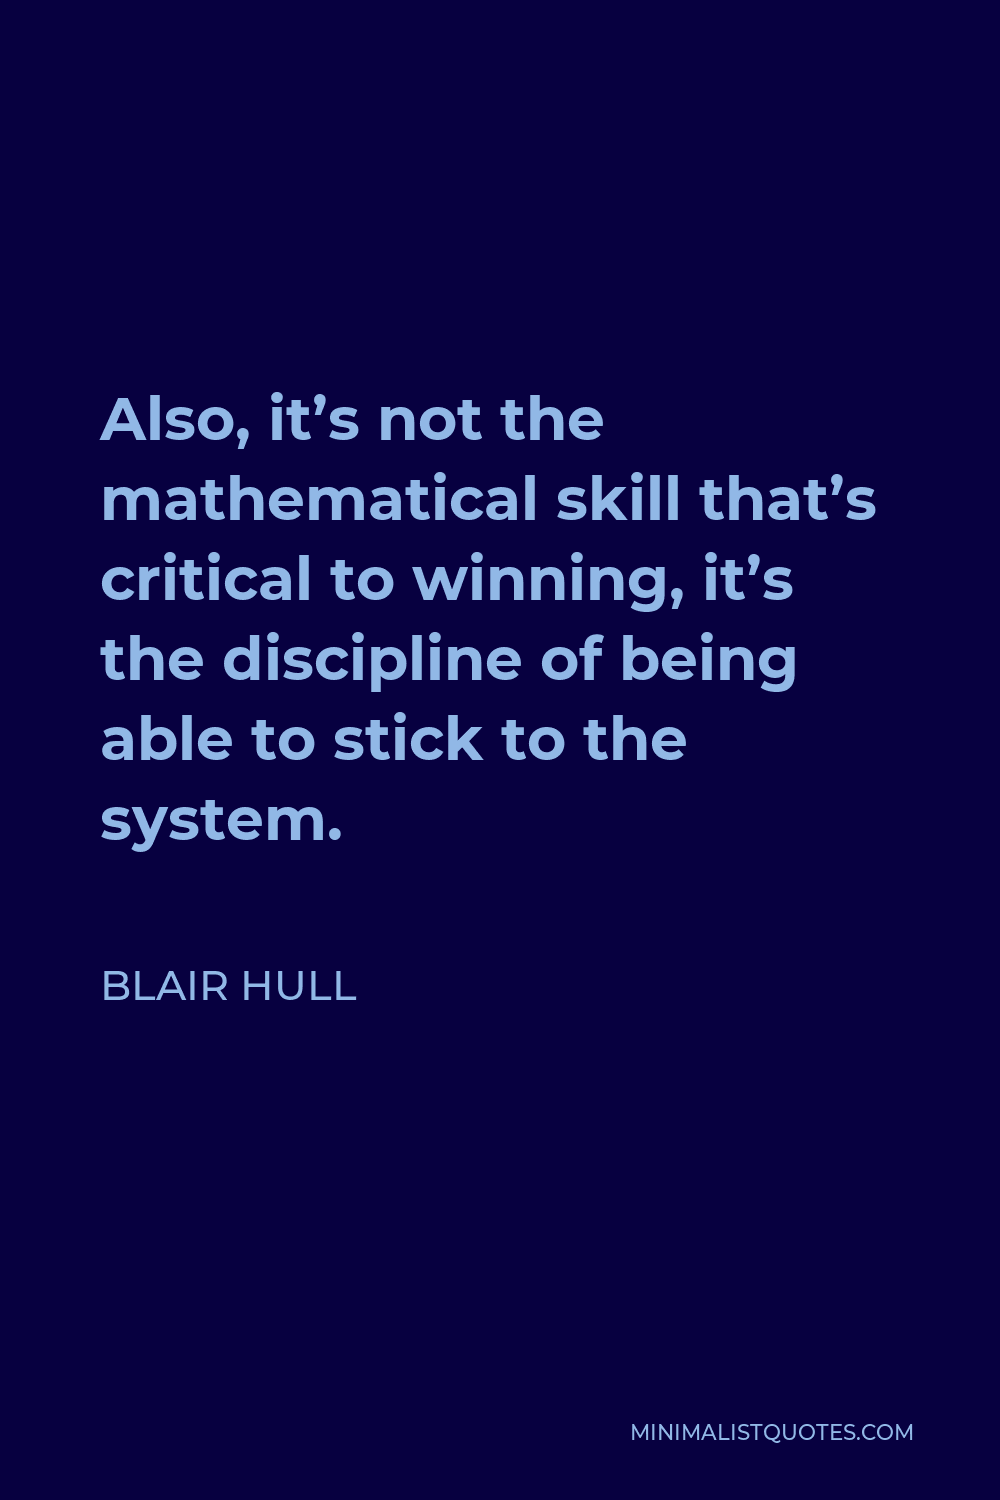 Blair Hull Quote - Also, it’s not the mathematical skill that’s critical to winning, it’s the discipline of being able to stick to the system.